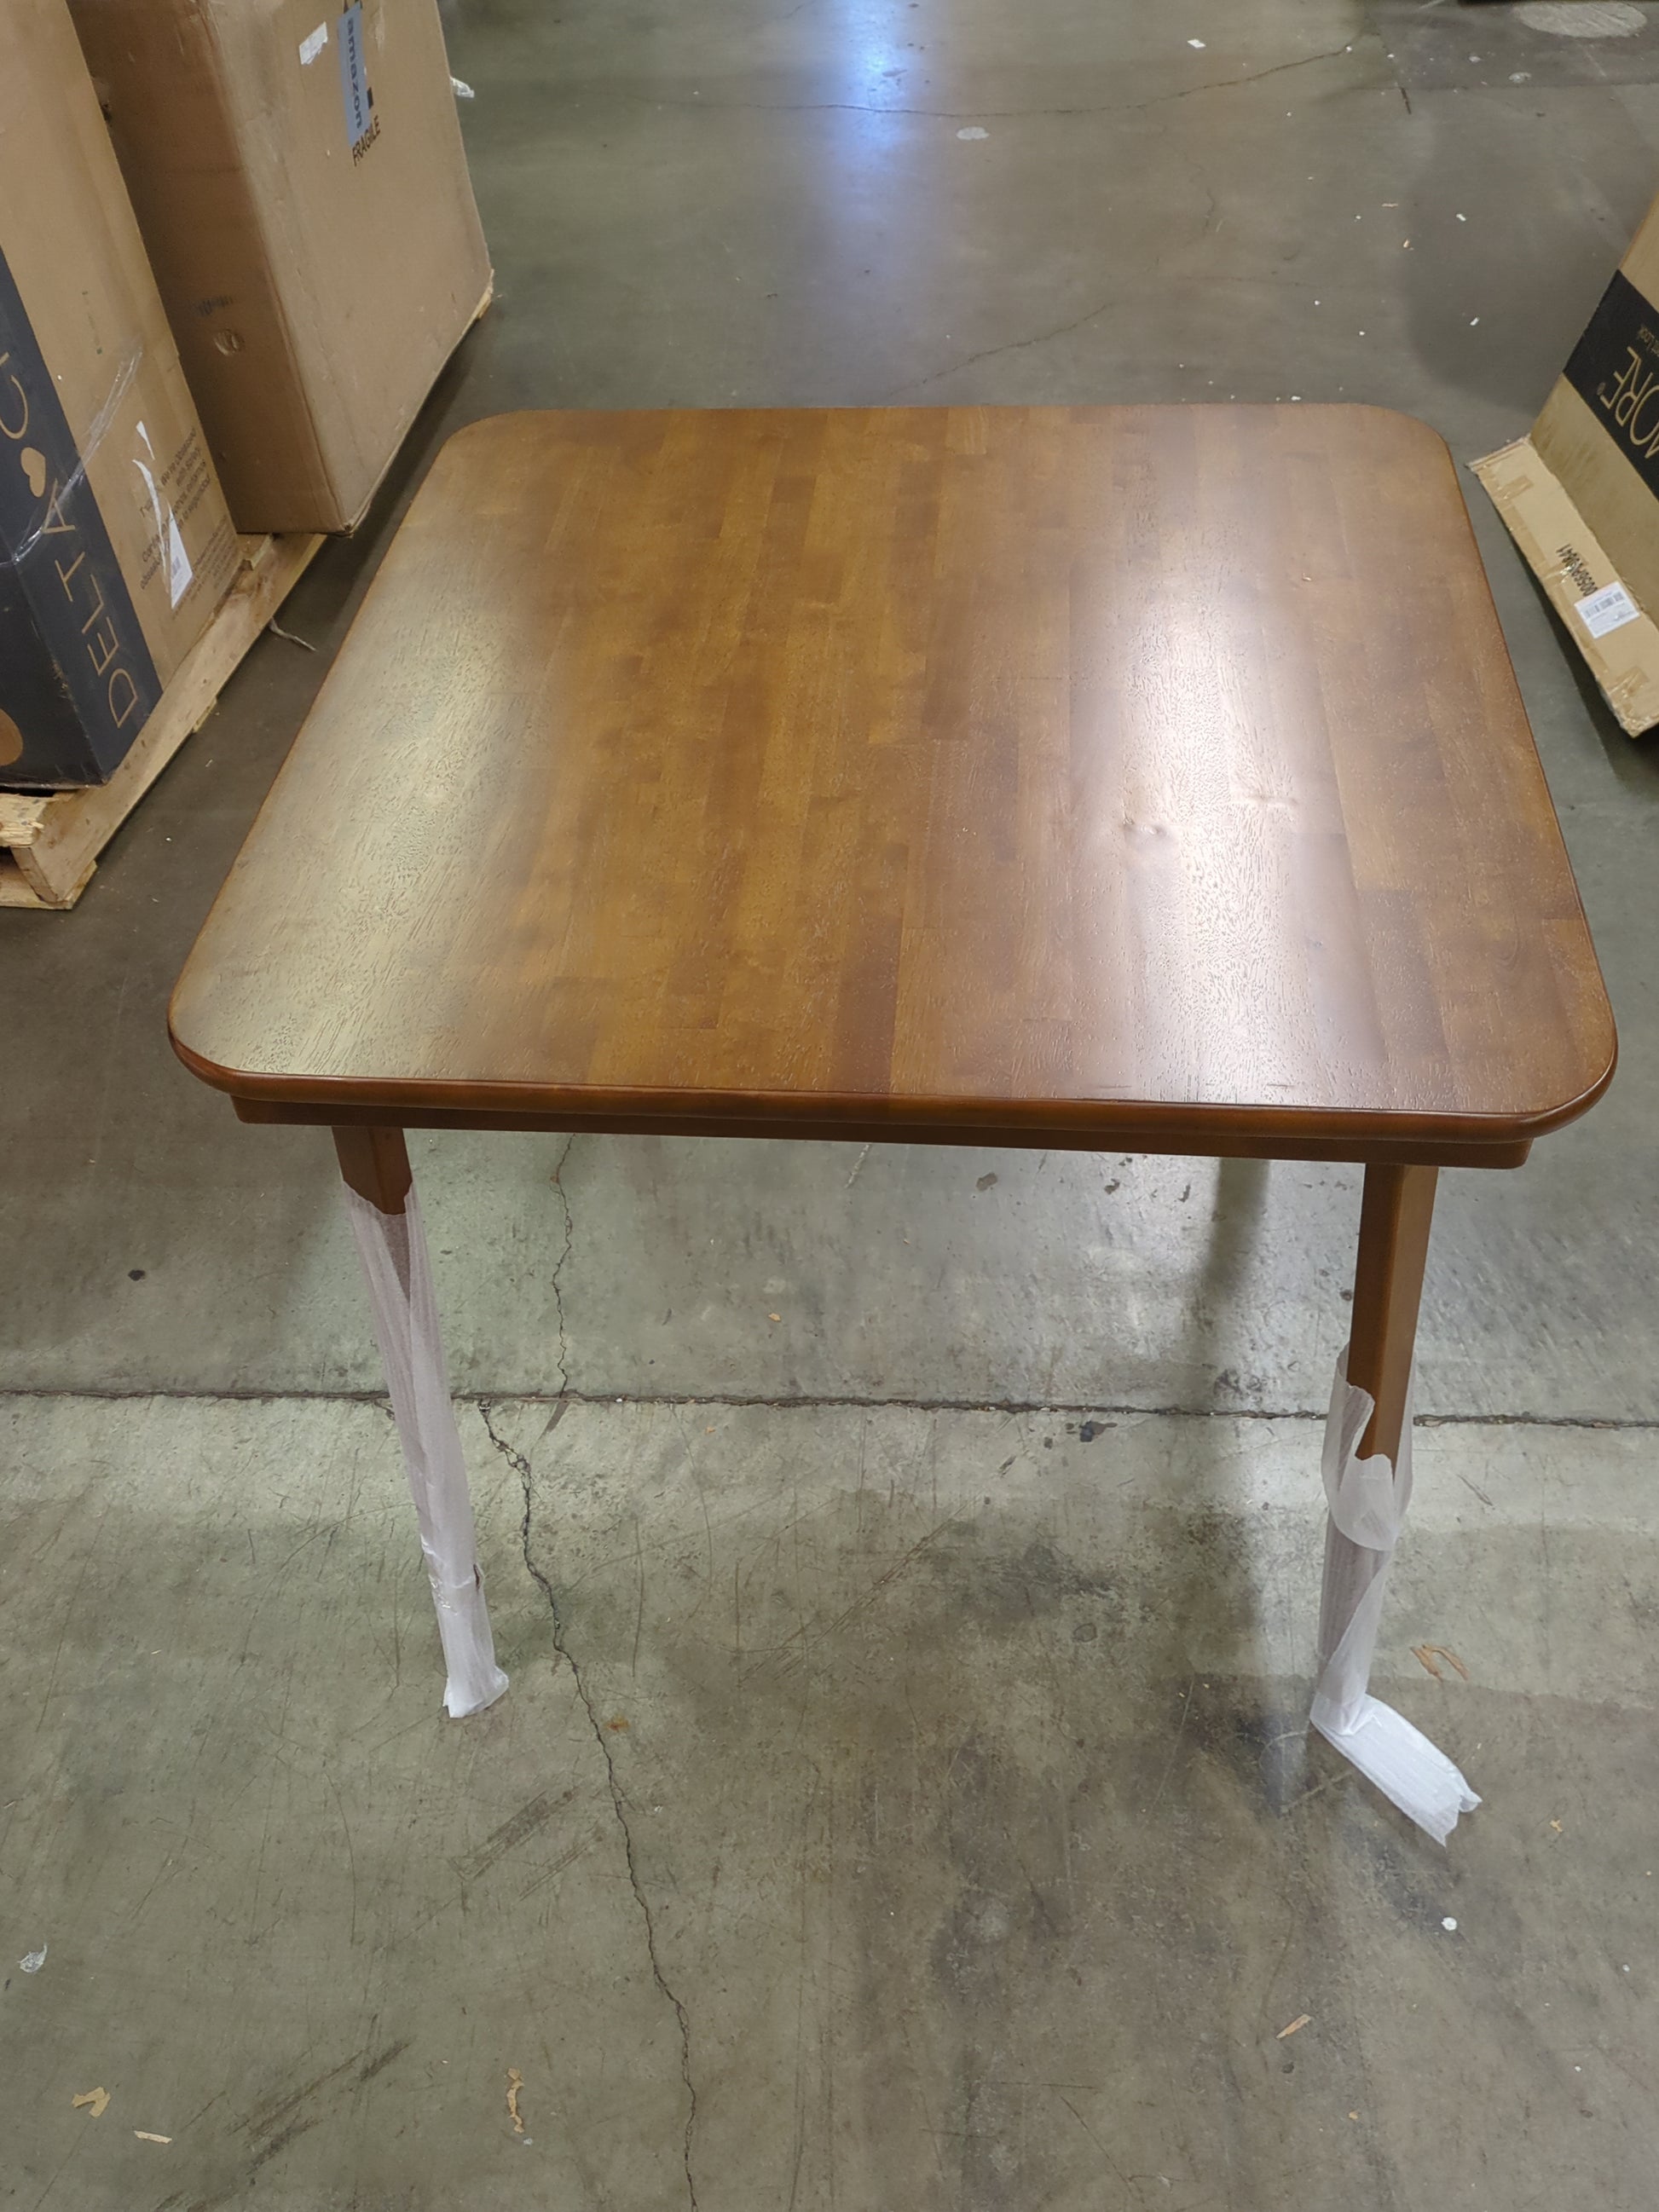 Costco - Stakmore 32" Wood Folding Table - Retail $99